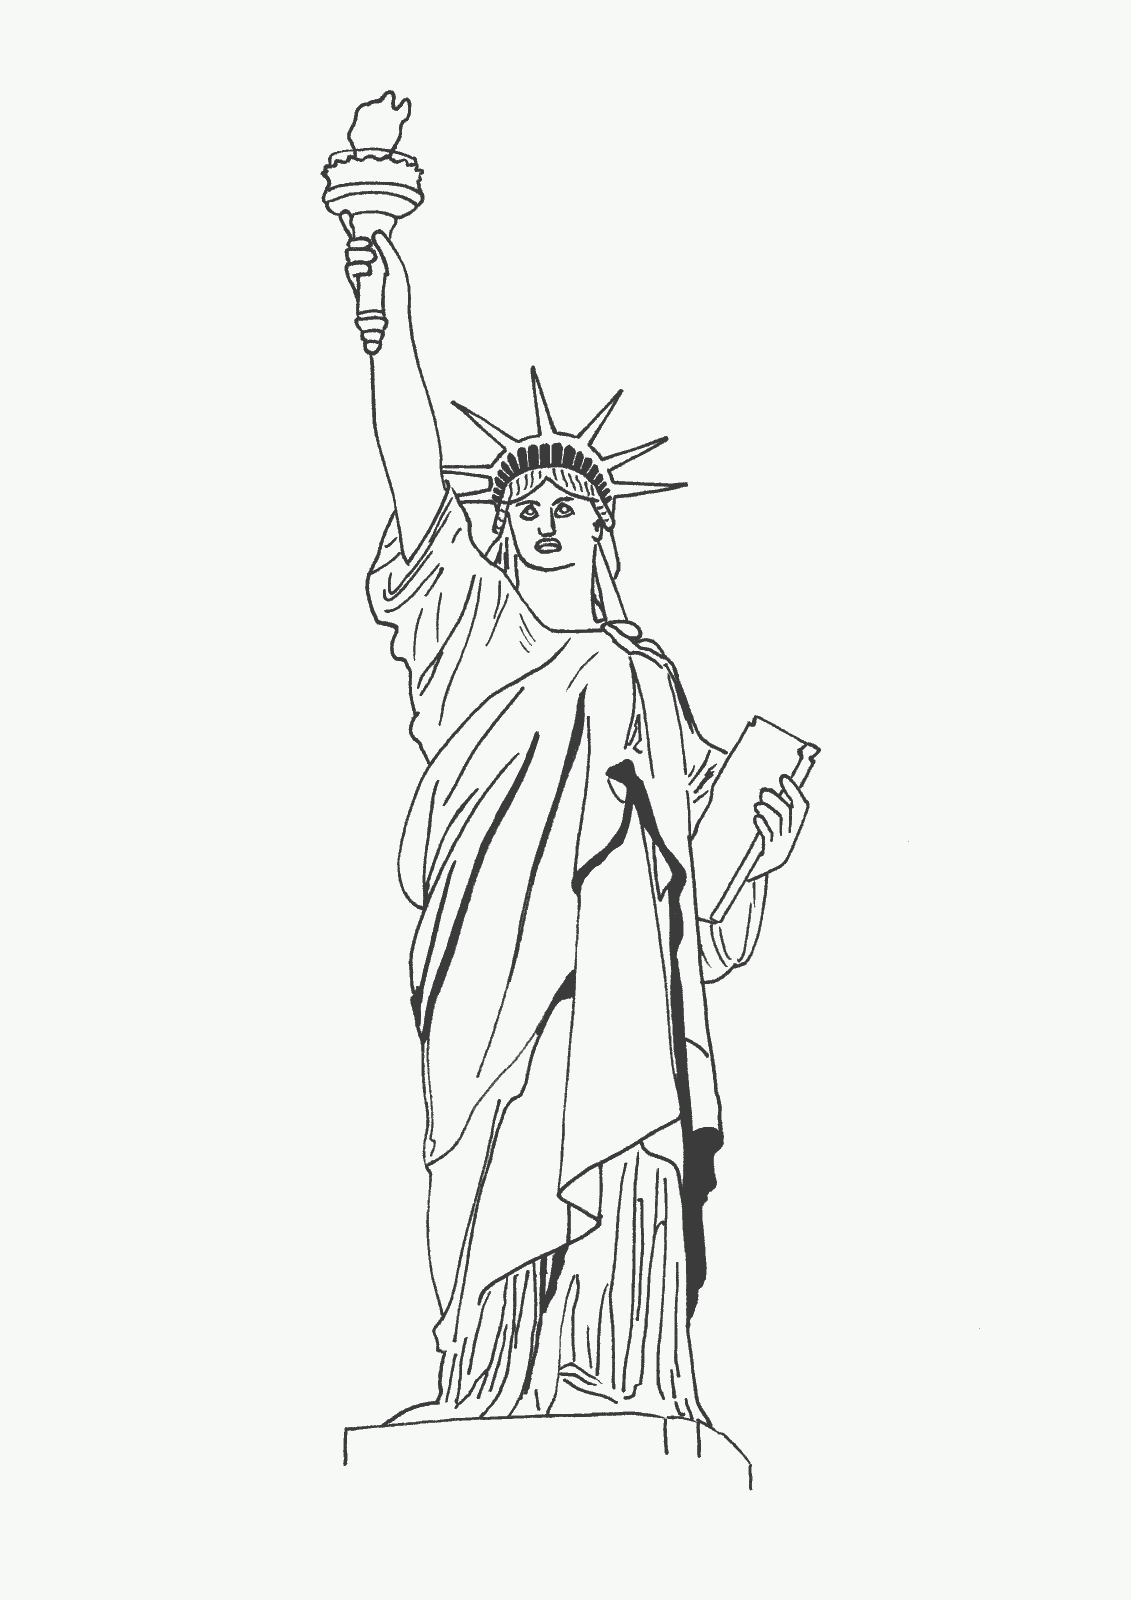 statue of liberty coloring page awesome statue of liberty coloring page download print page statue coloring of liberty 